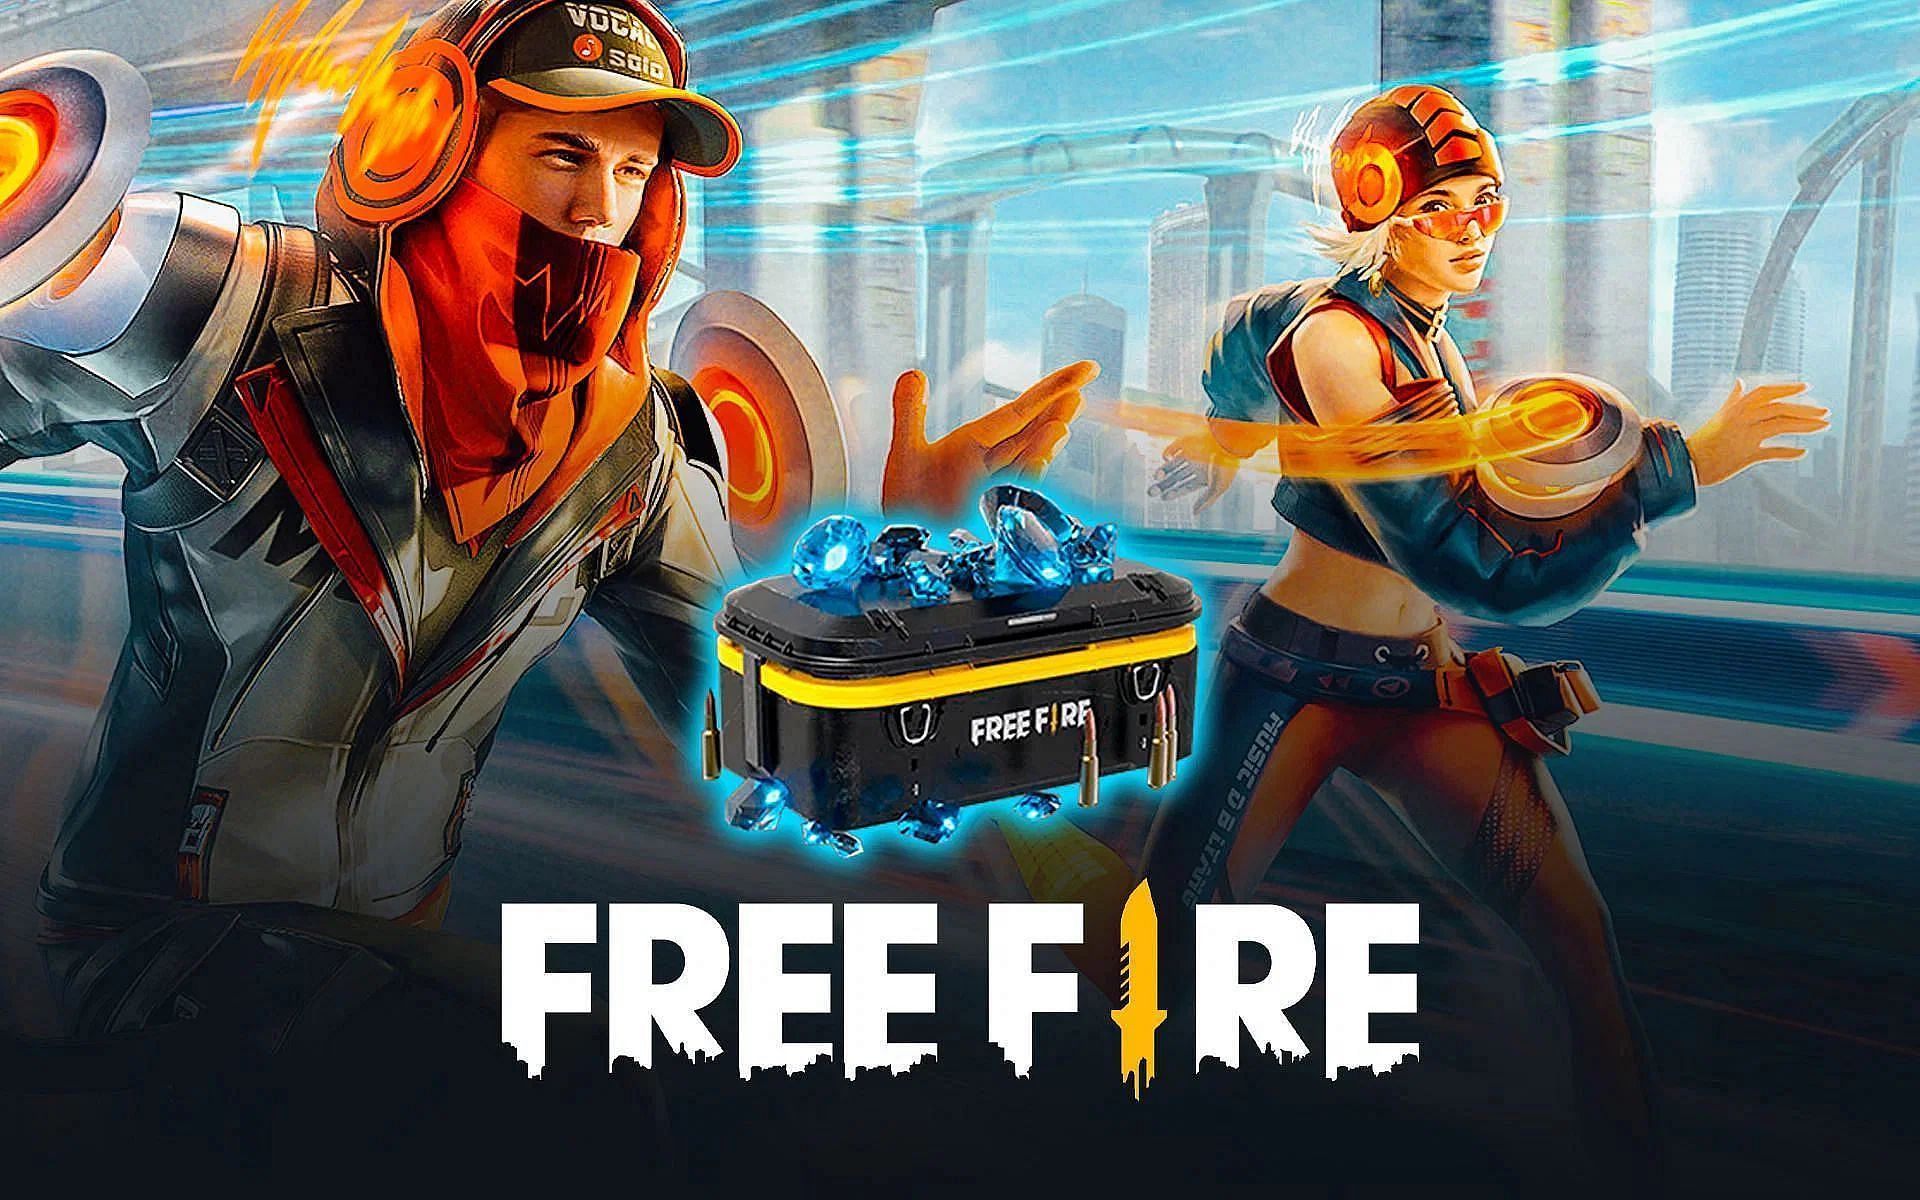 Why using unlimited diamond mods is not safe in Free Fire? (Image via Sportskeeda)